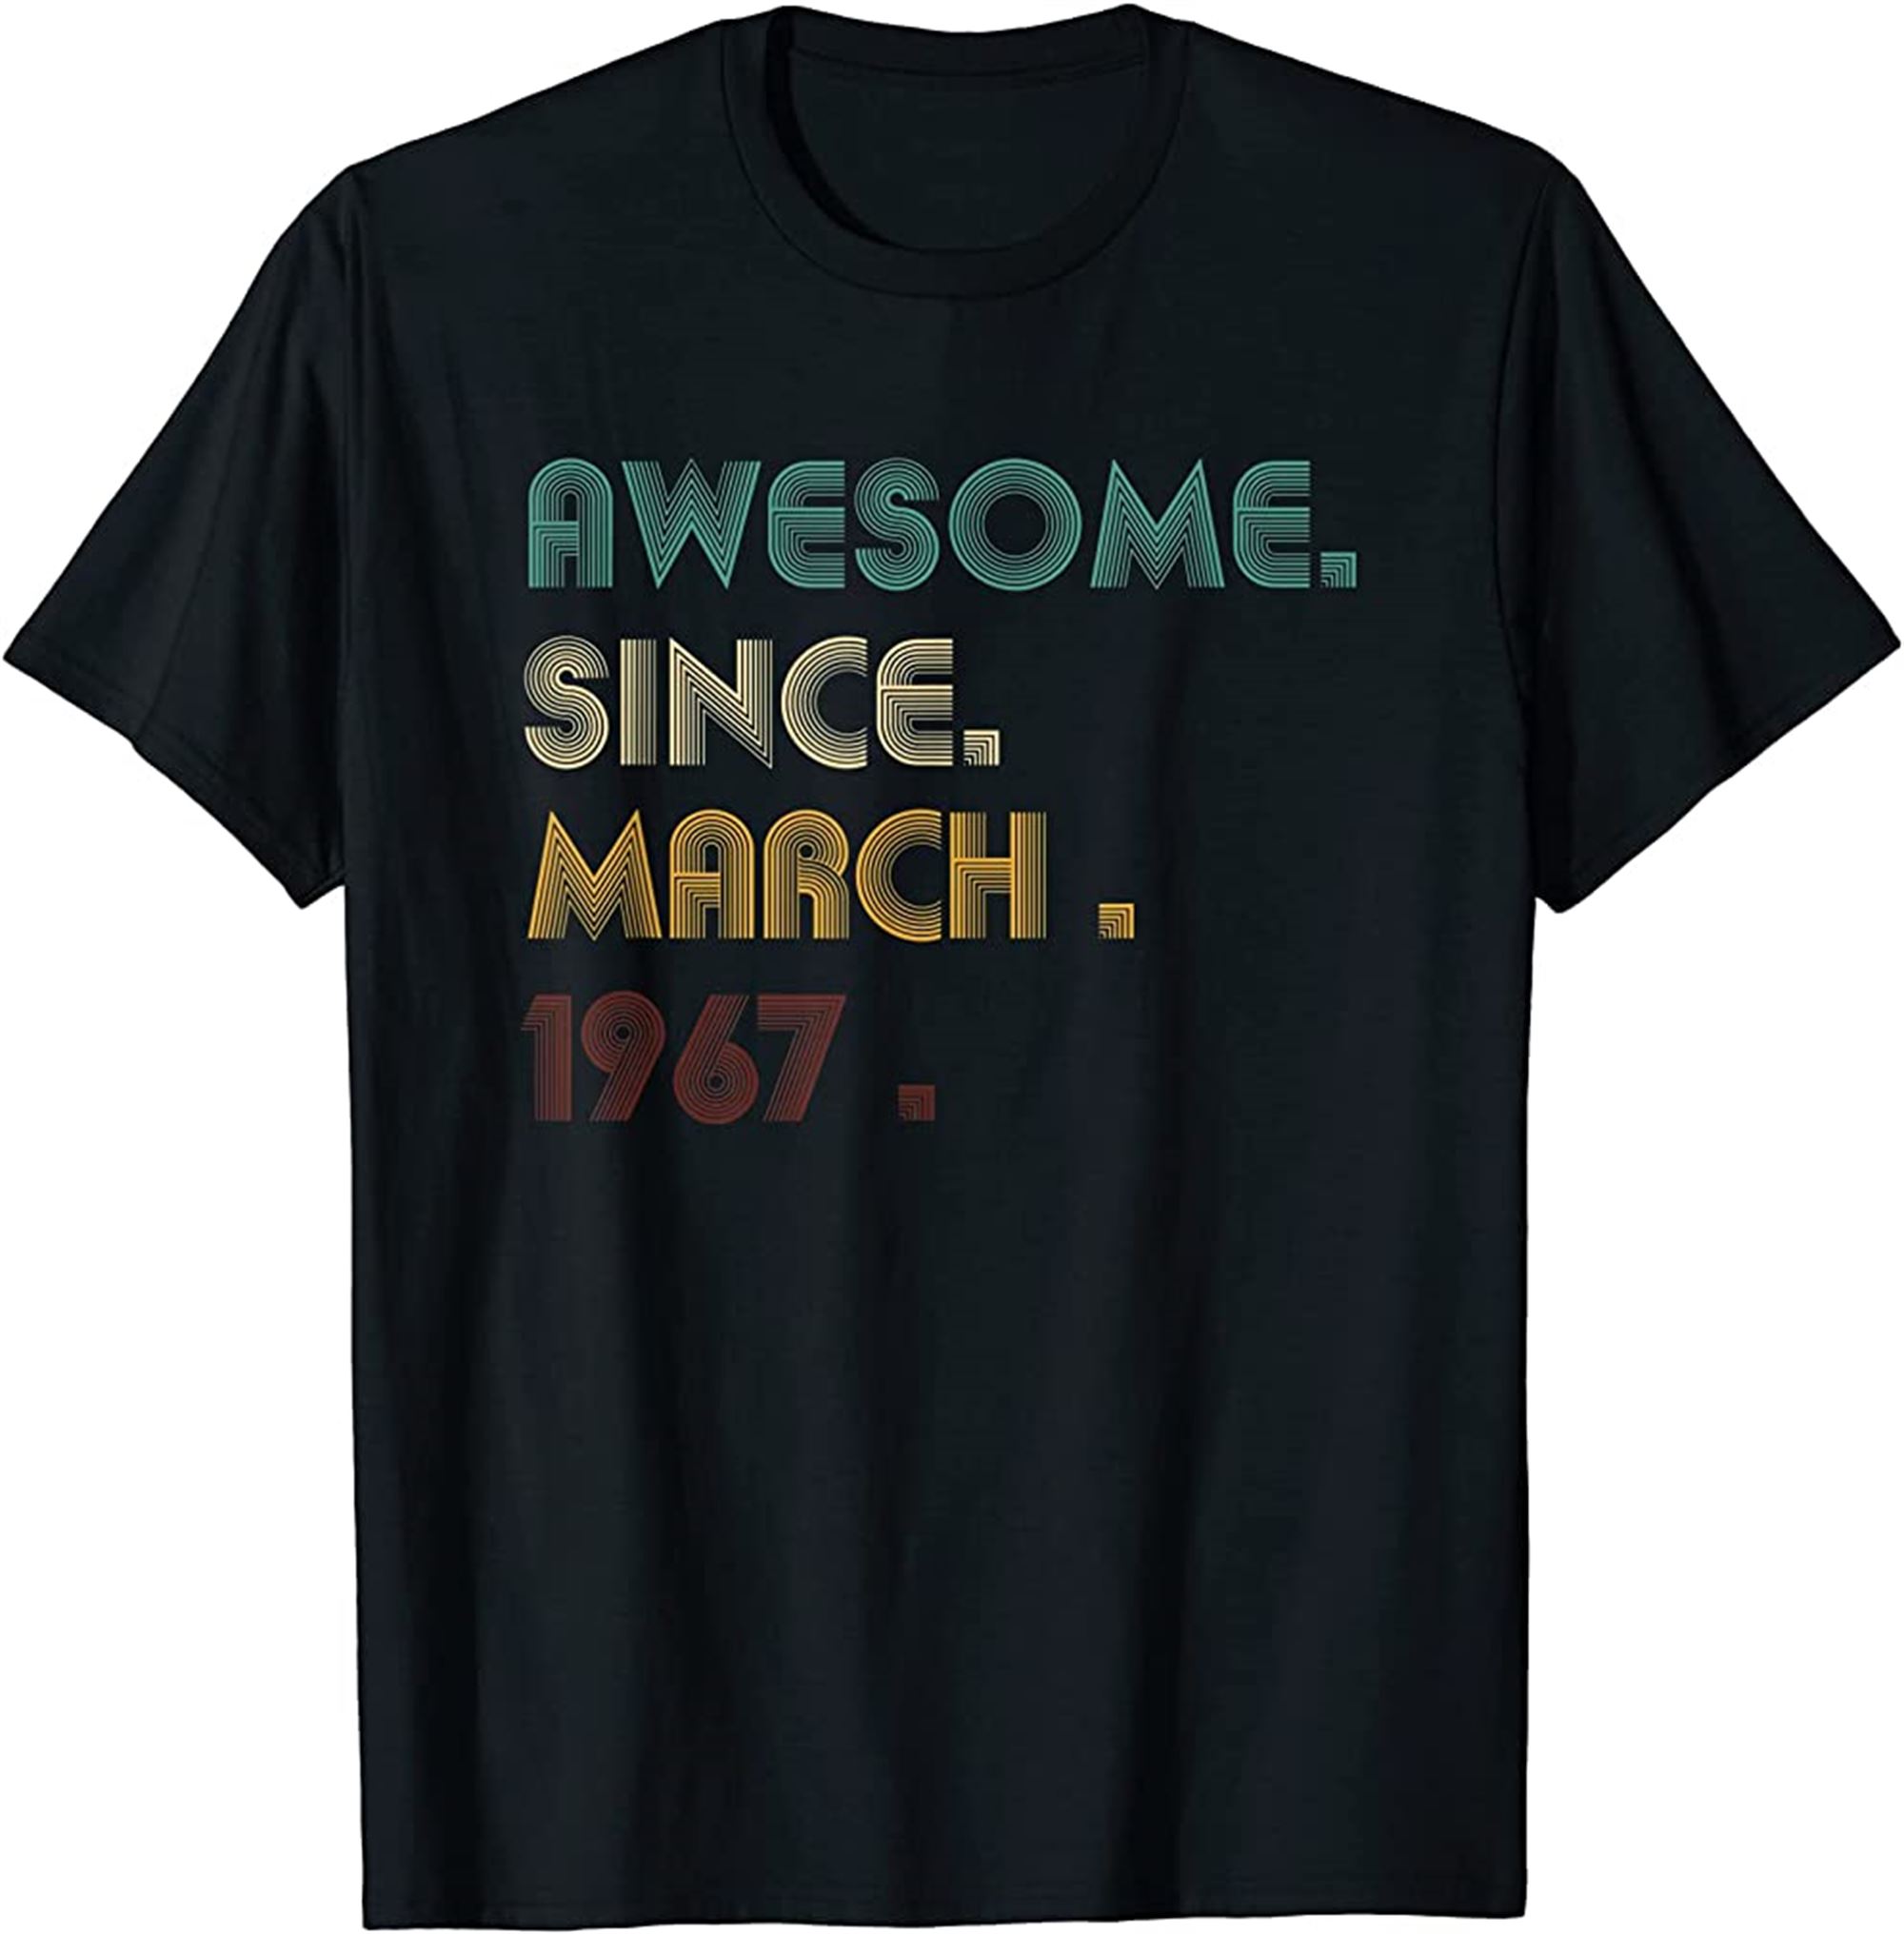 55 Year Old Awesome Since March 1967 Gifts 55th Birthday T-shirt Full Size Up To 5xl